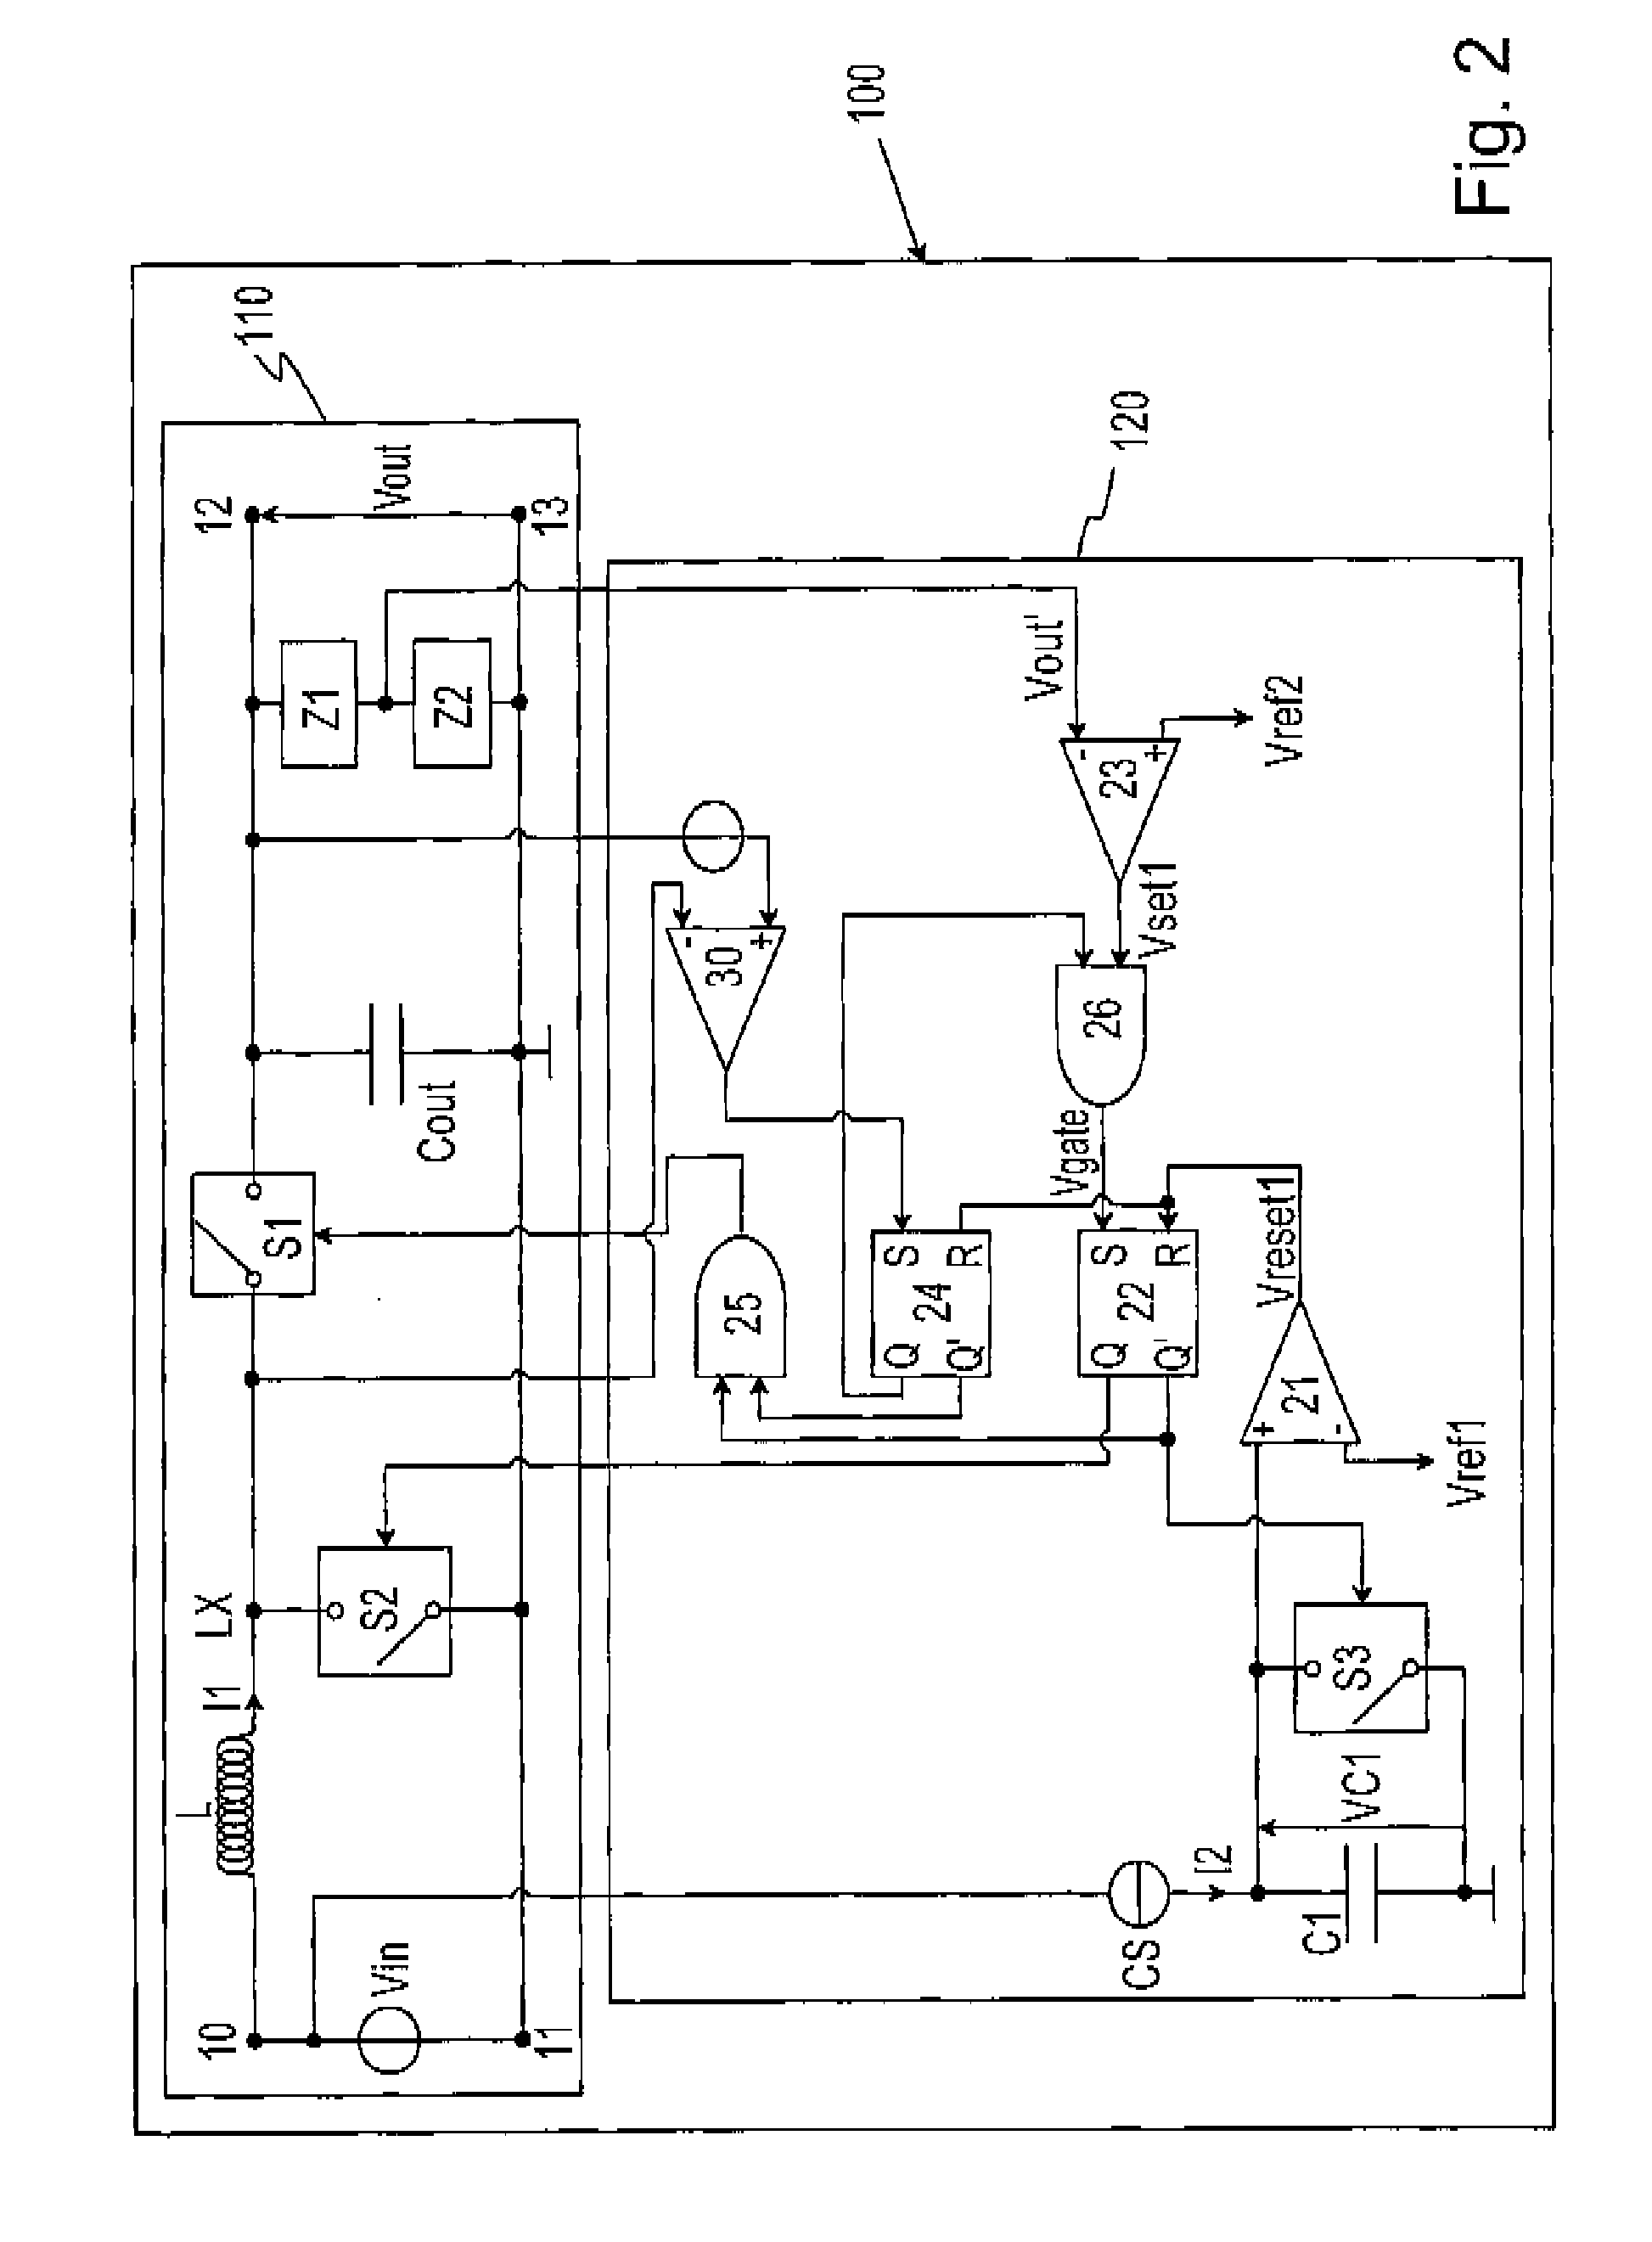 Lower power controller for DC to DC converters